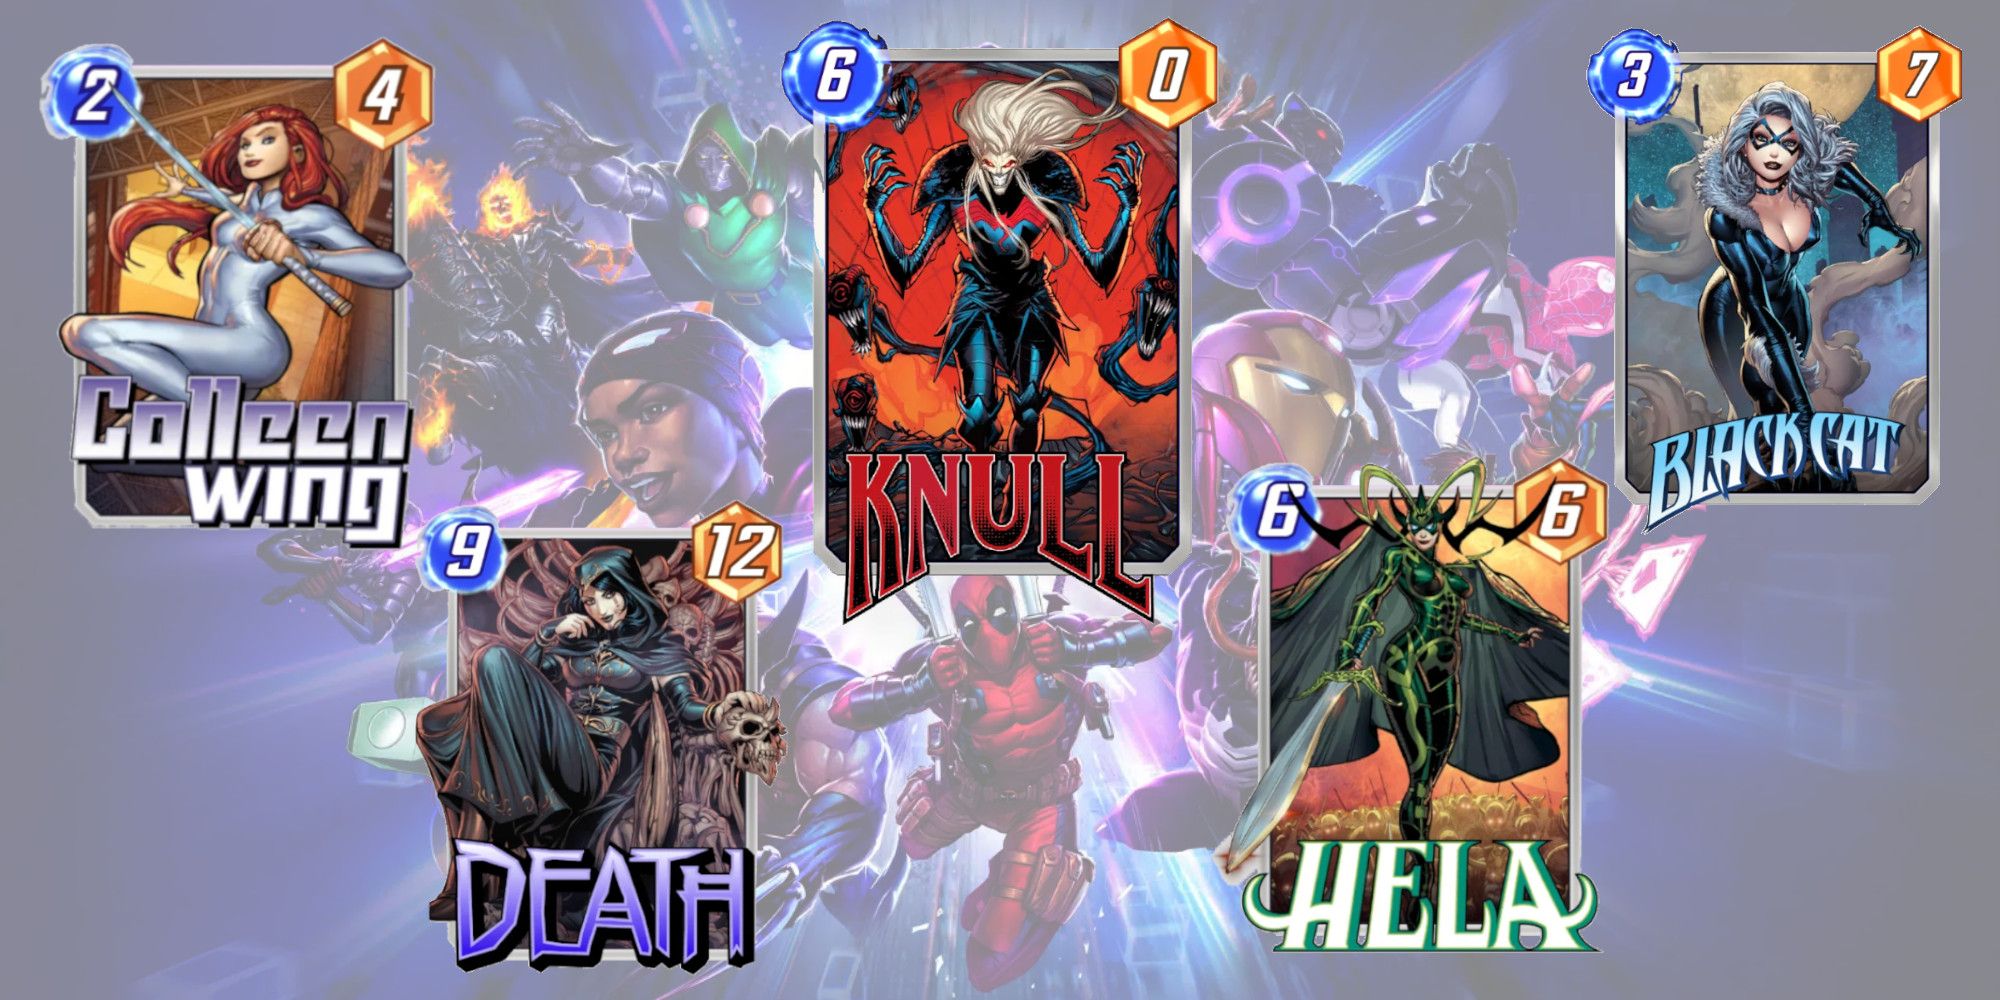 Marvel Snap Best Cards All Female Deck Best Combo Cards Death, Knull, Colleen Wing, Black Cat, and Hela